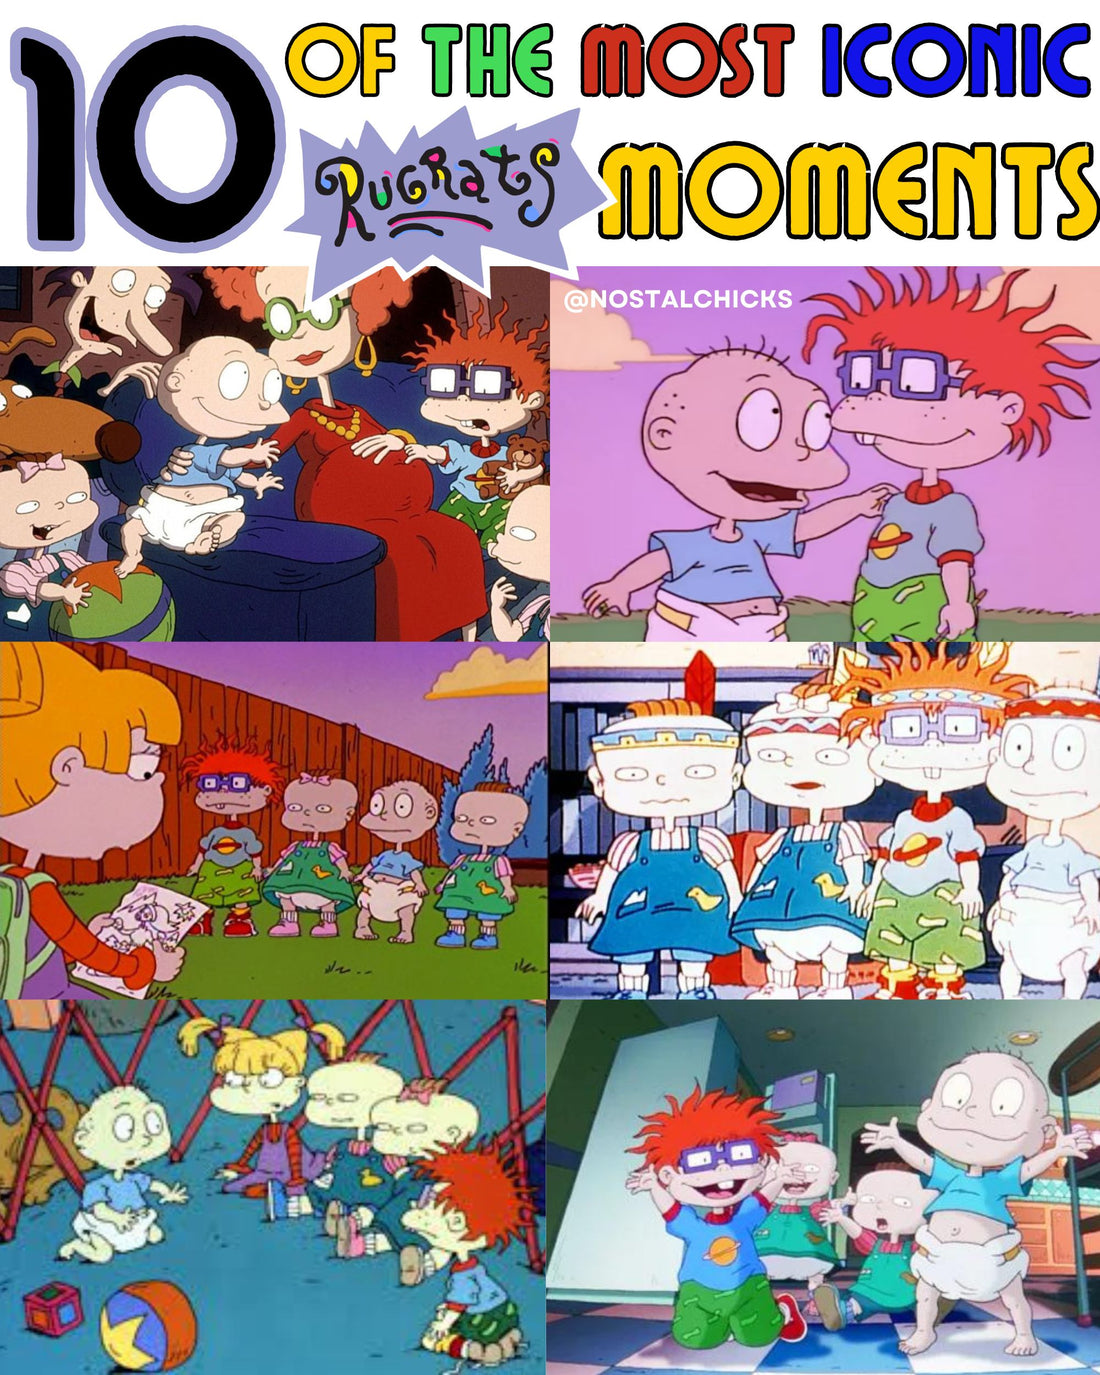 10 OF THE MOST ICONIC RUGRATS MOMENTS